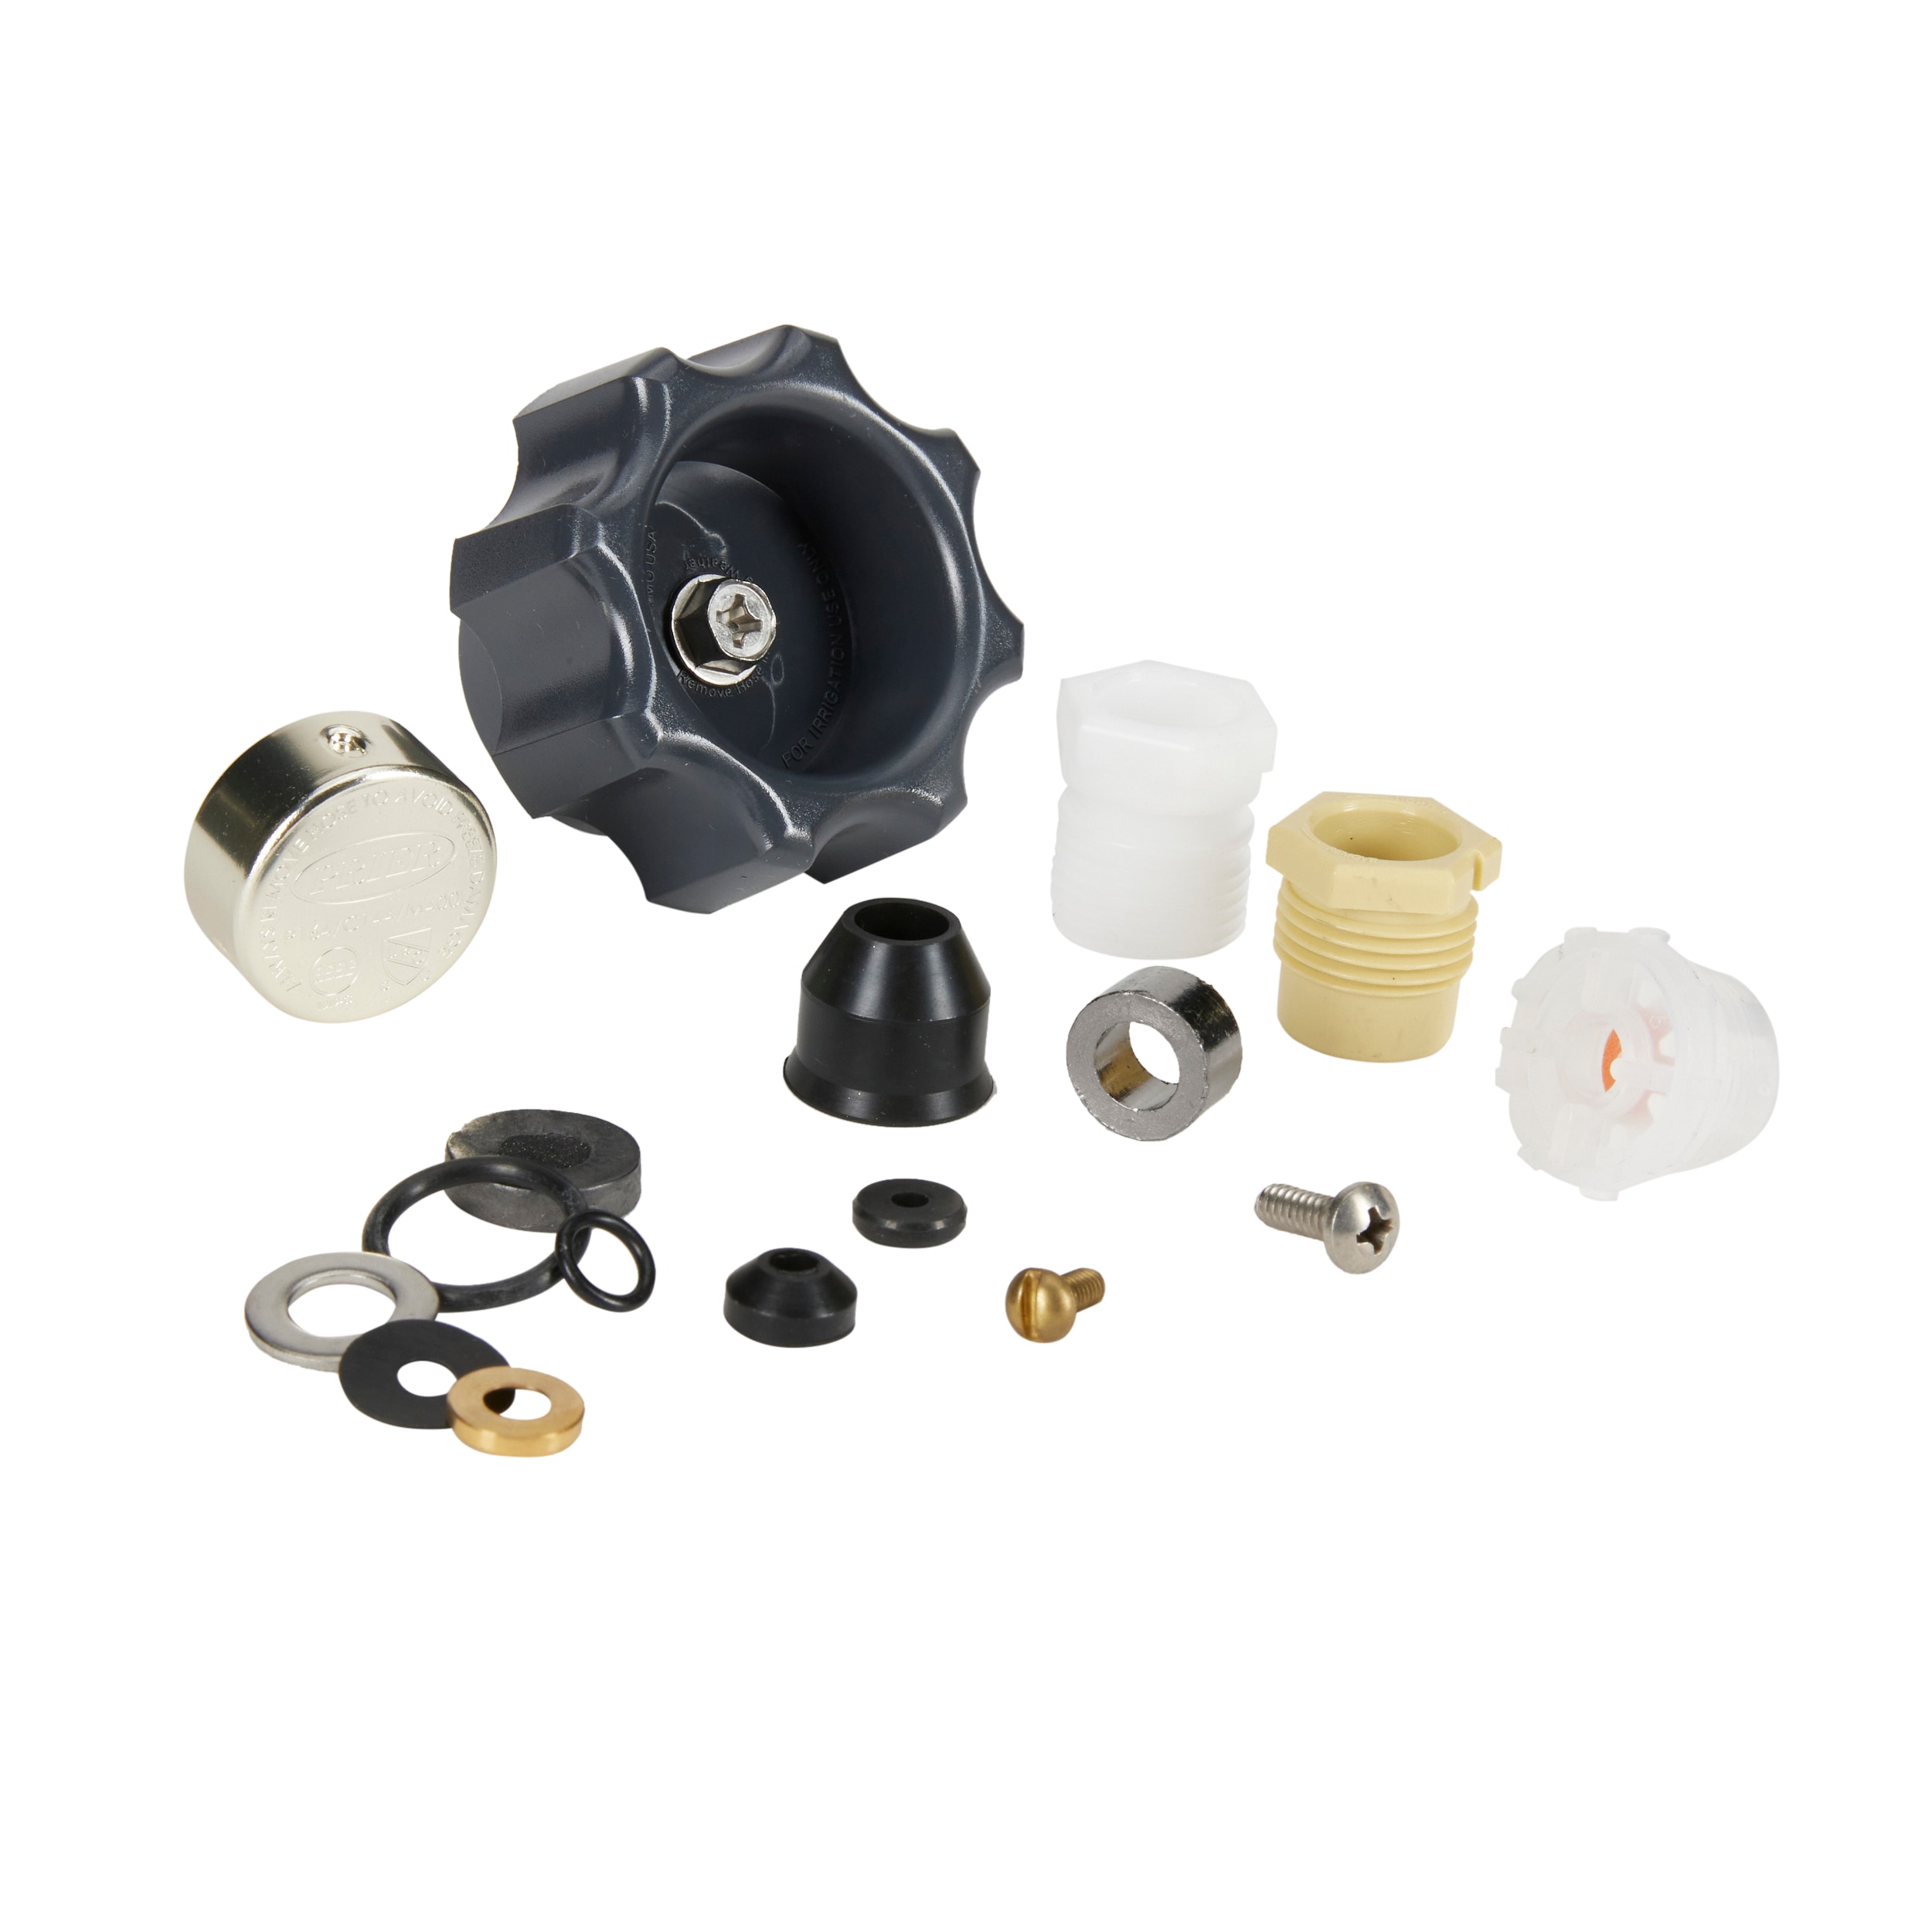 Prier Products Prier Complete Mansfield Service Repair Kit For 300, 400 and  500 Series Wall Hydrants in the Valve Repair Parts department at